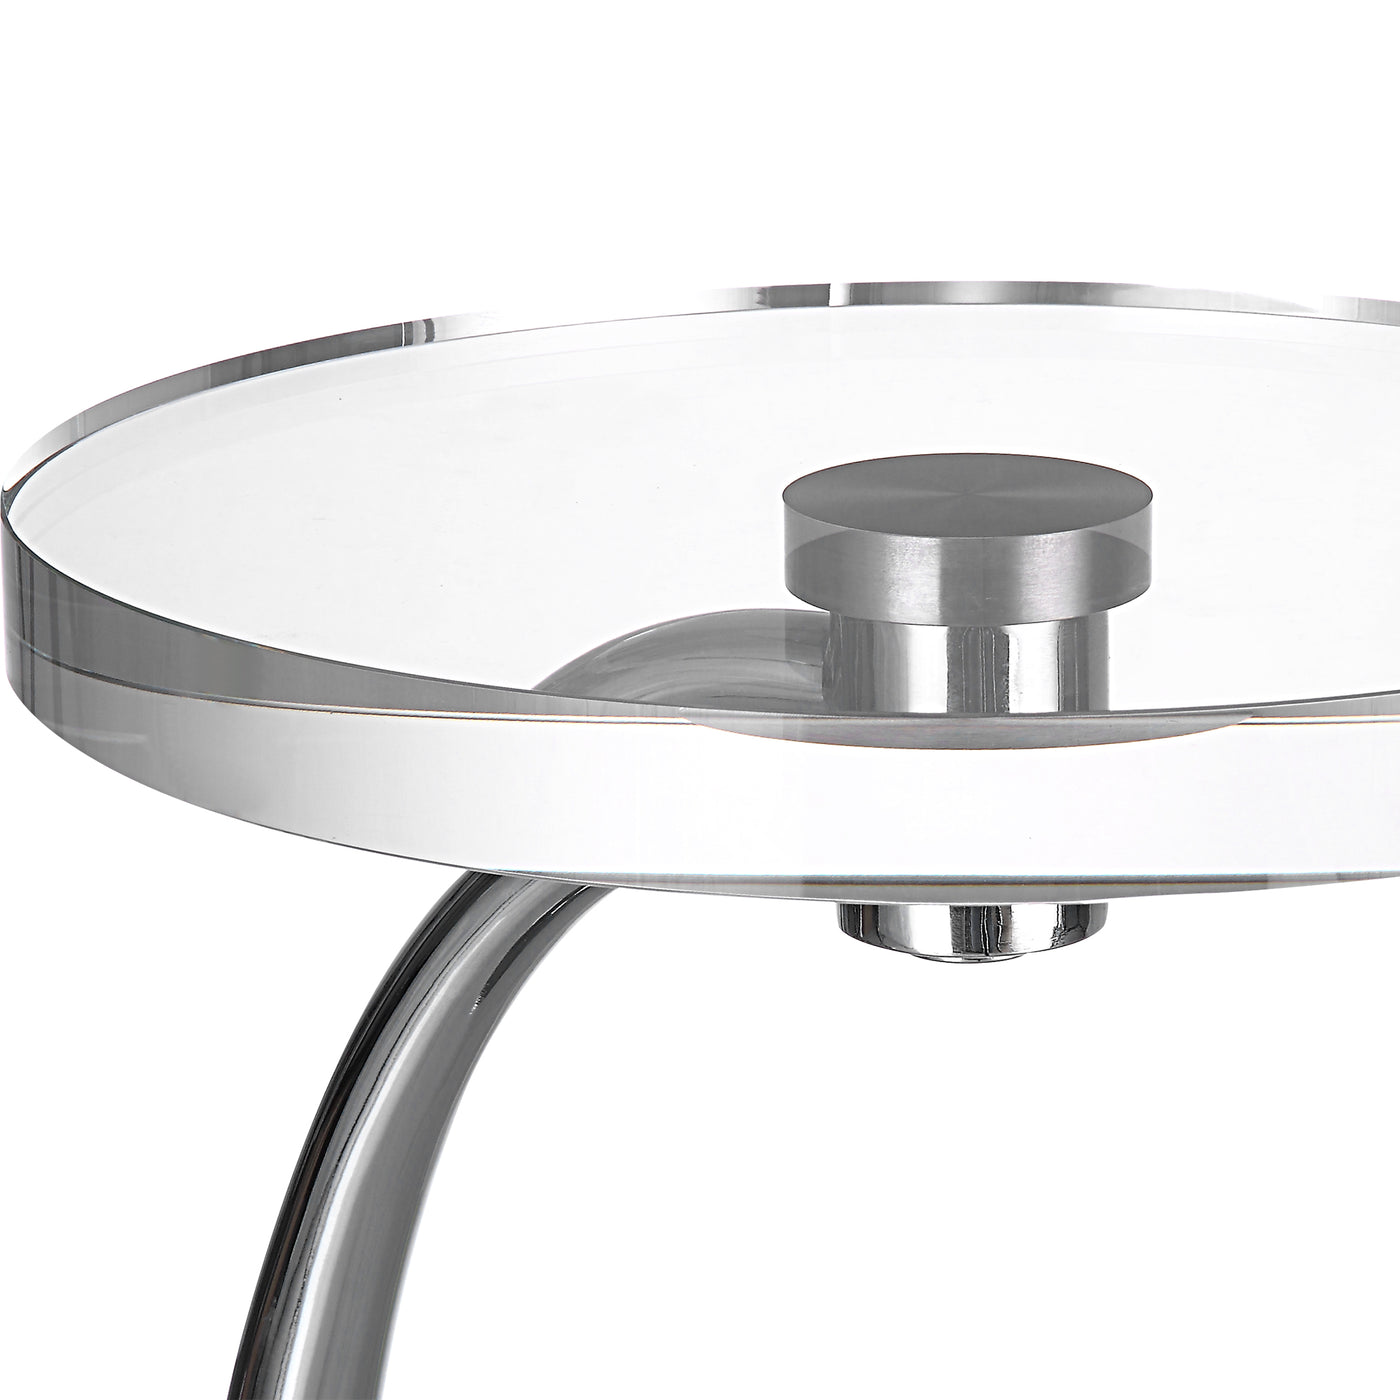 Minimal Yet Sophisticated, The Waveney Drink Table Displays A Sleek Curved Base In Polished Nickel Plated Iron With A Thic...